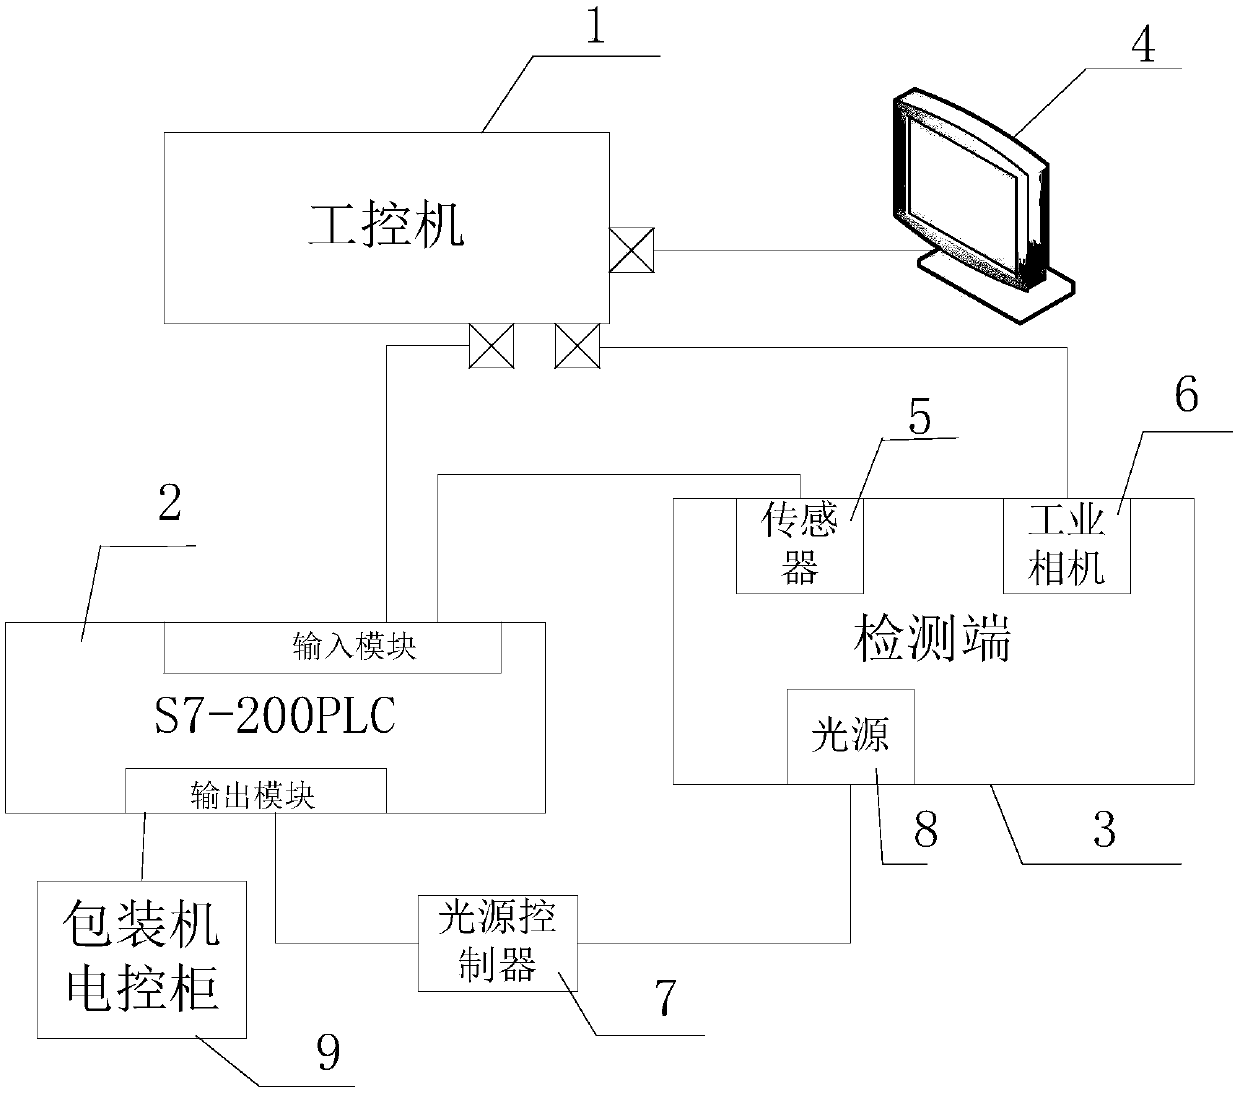 Tobacco package tax receipt online detection system and method, and tax receipt tobacco package conveying system comprising online detection system